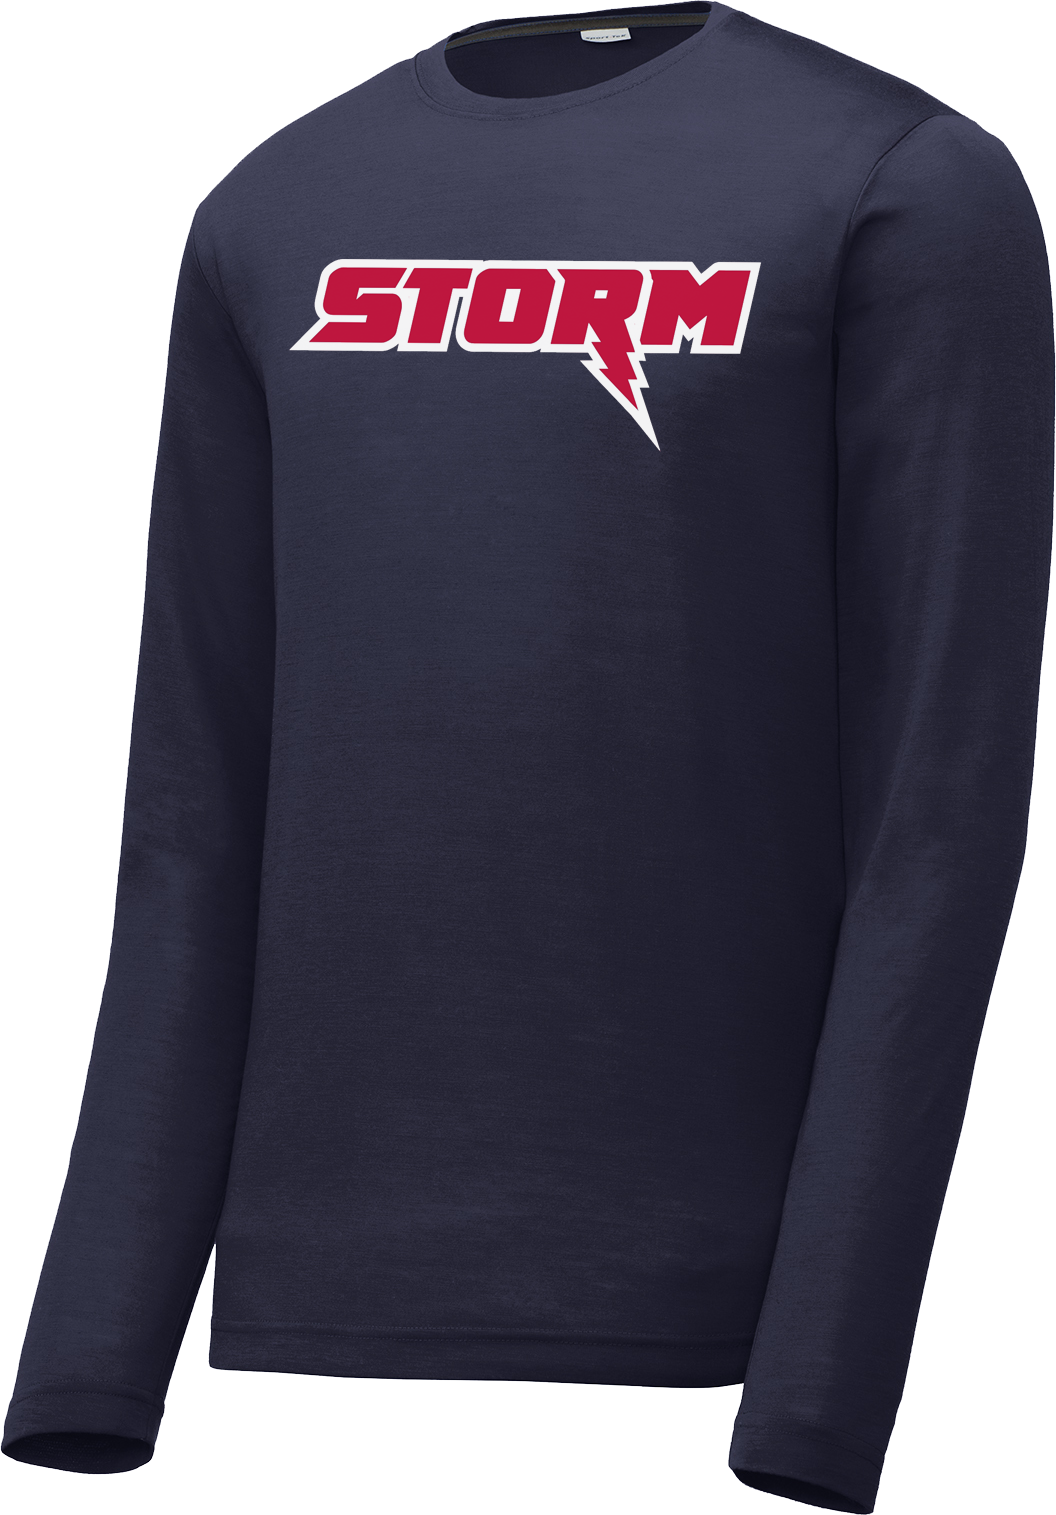 Oak Mountain Youth Lacrosse Navy Long Sleeve CottonTouch Performance Shirt